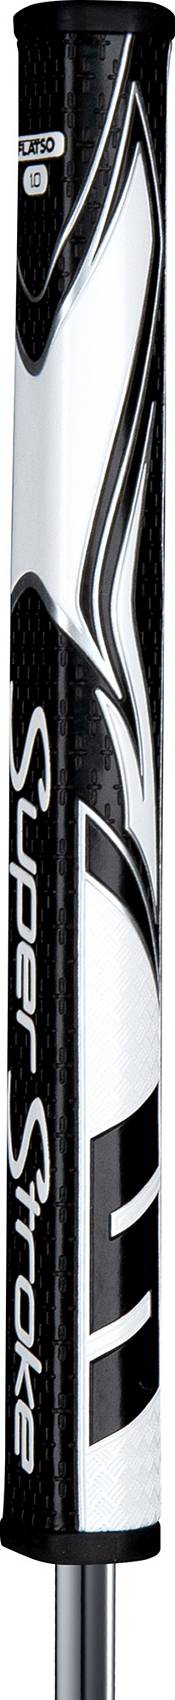 SuperStroke Zenergy Flatso 1.0 Putter Grip product image